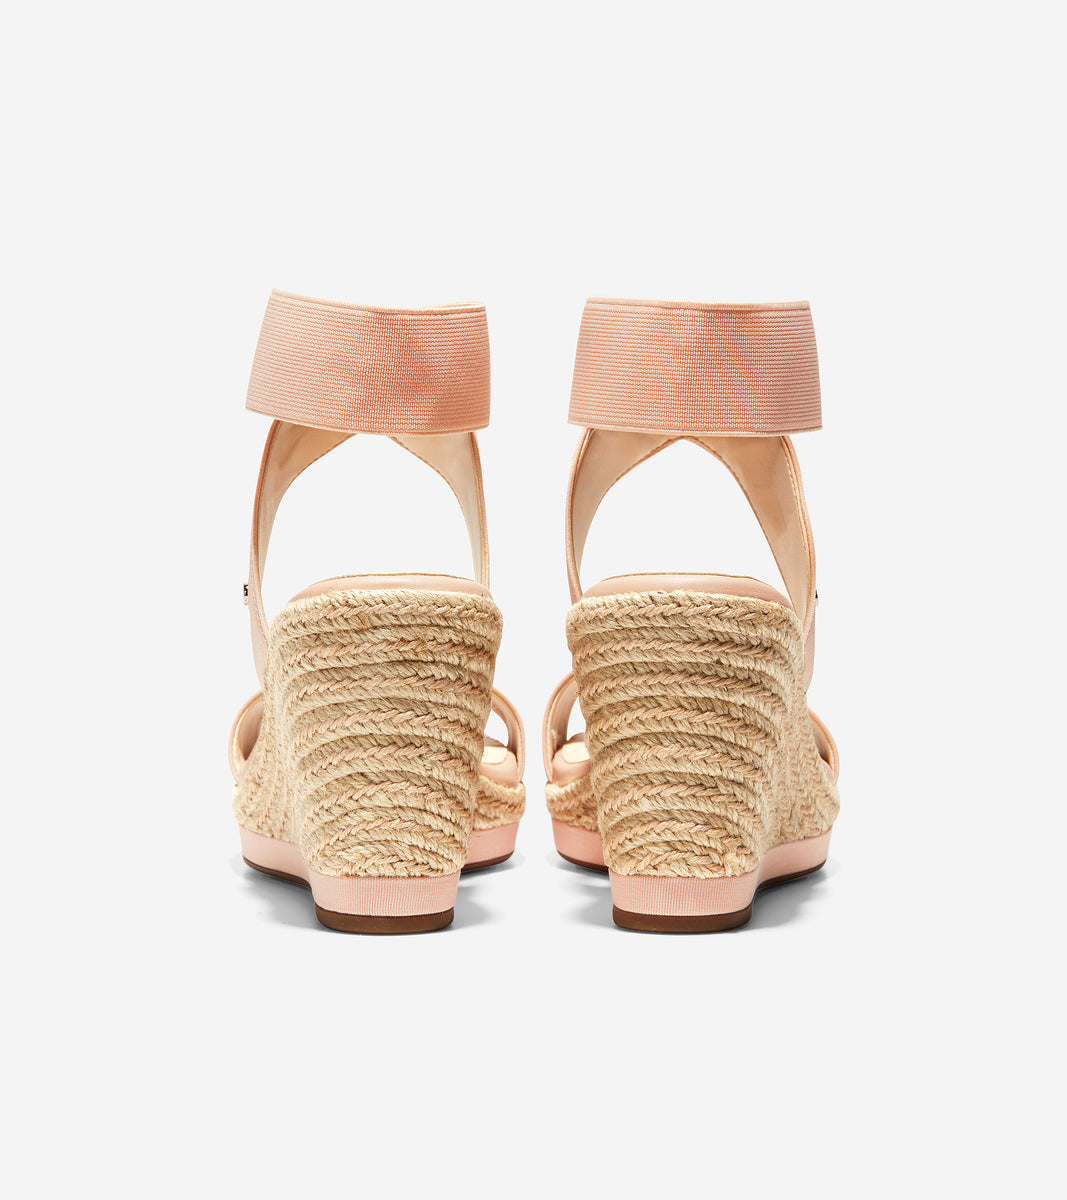 ColeHaan-Cloudfeel Espadrille Wedge Sandal-w17639-Mahogany Rose Leather